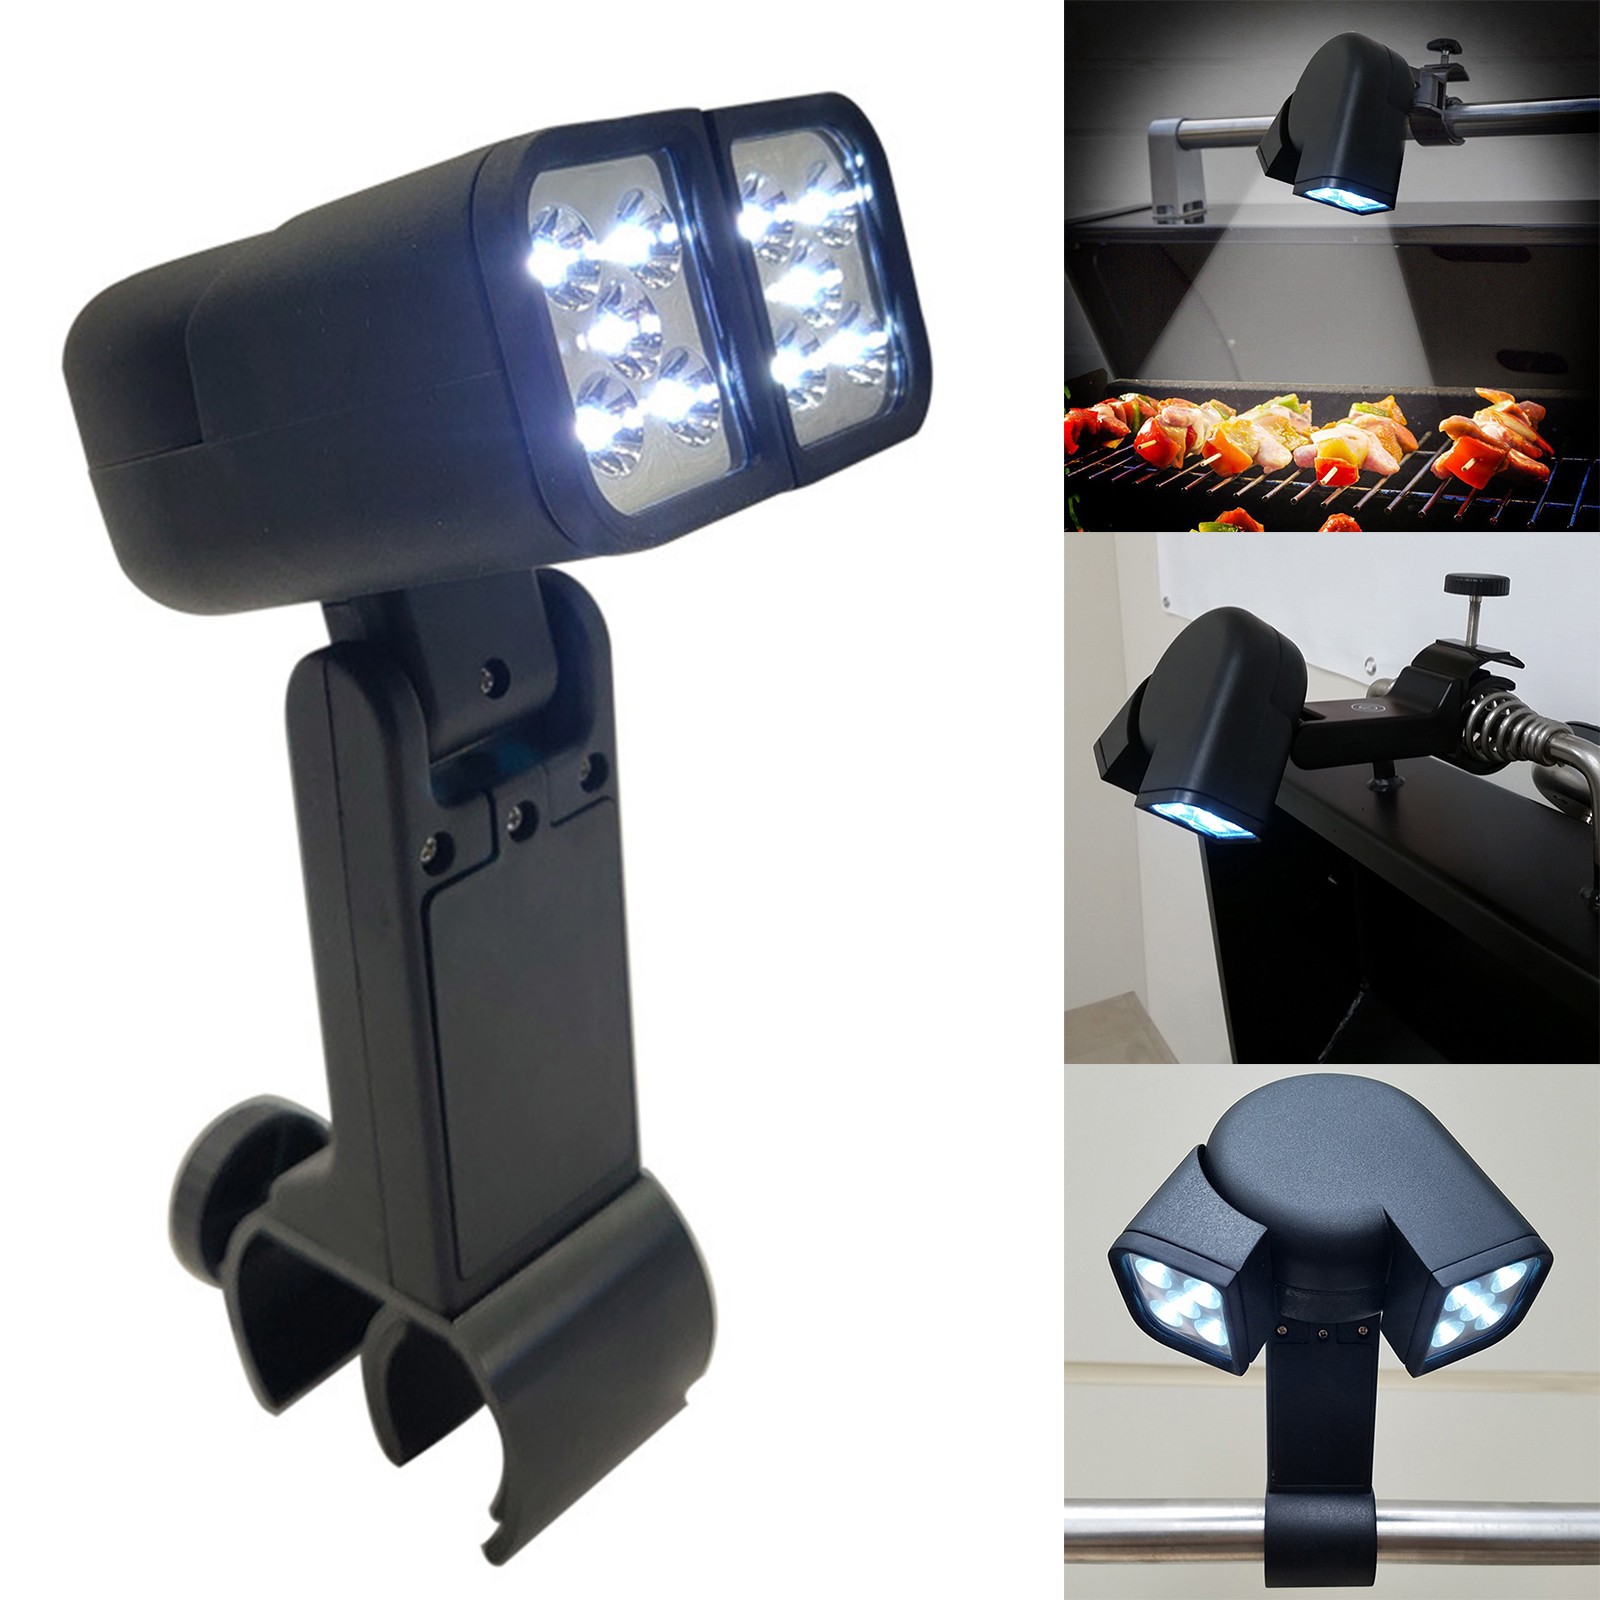 Bbq Grill Light Outdoor Super Bright LED Lamp Base Barbecue with 10 Super Bright - image 3 of 4